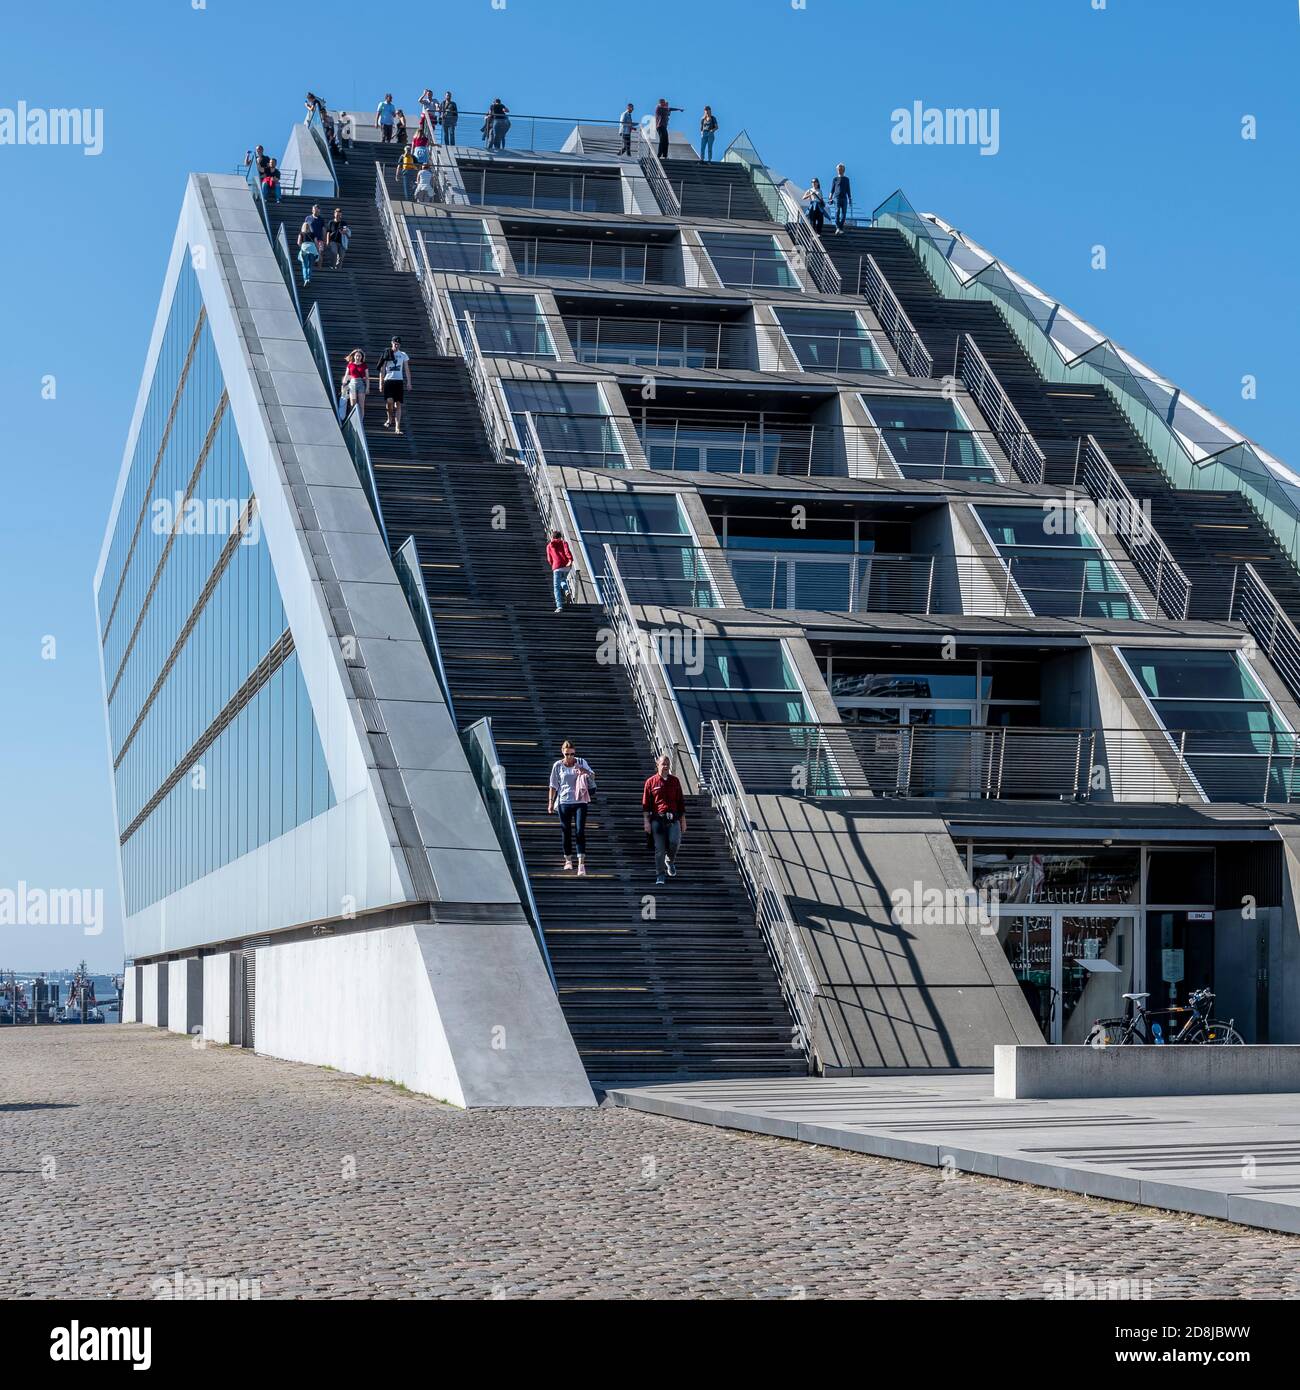 This pointy ship-shaped building is the Dockland Office Building in Hamburg. Above the offices are steps up to the observation deck on the roof. Stock Photo